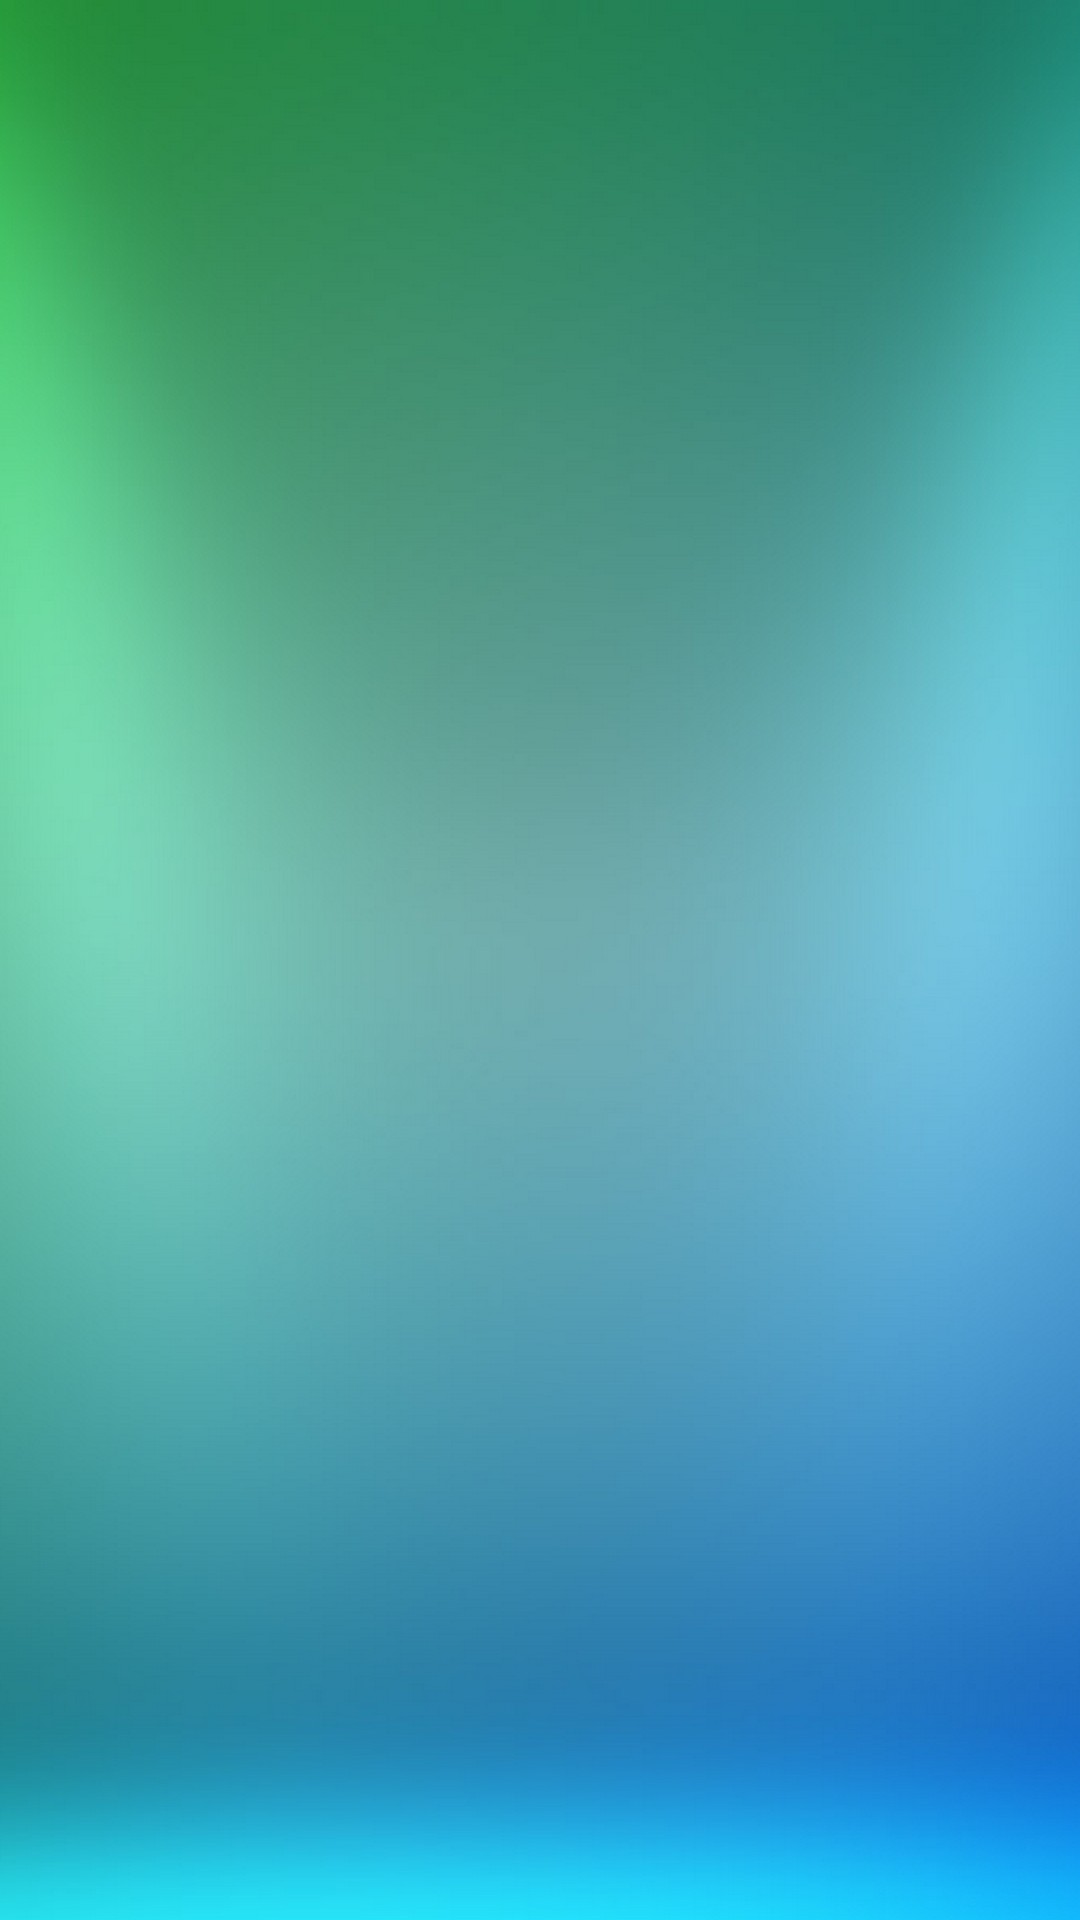 Mobile Wallpapers Blue and Green with image resolution 1080x1920 pixel. You can make this wallpaper for your iPhone 5, 6, 7, 8, X backgrounds, Mobile Screensaver, or iPad Lock Screen